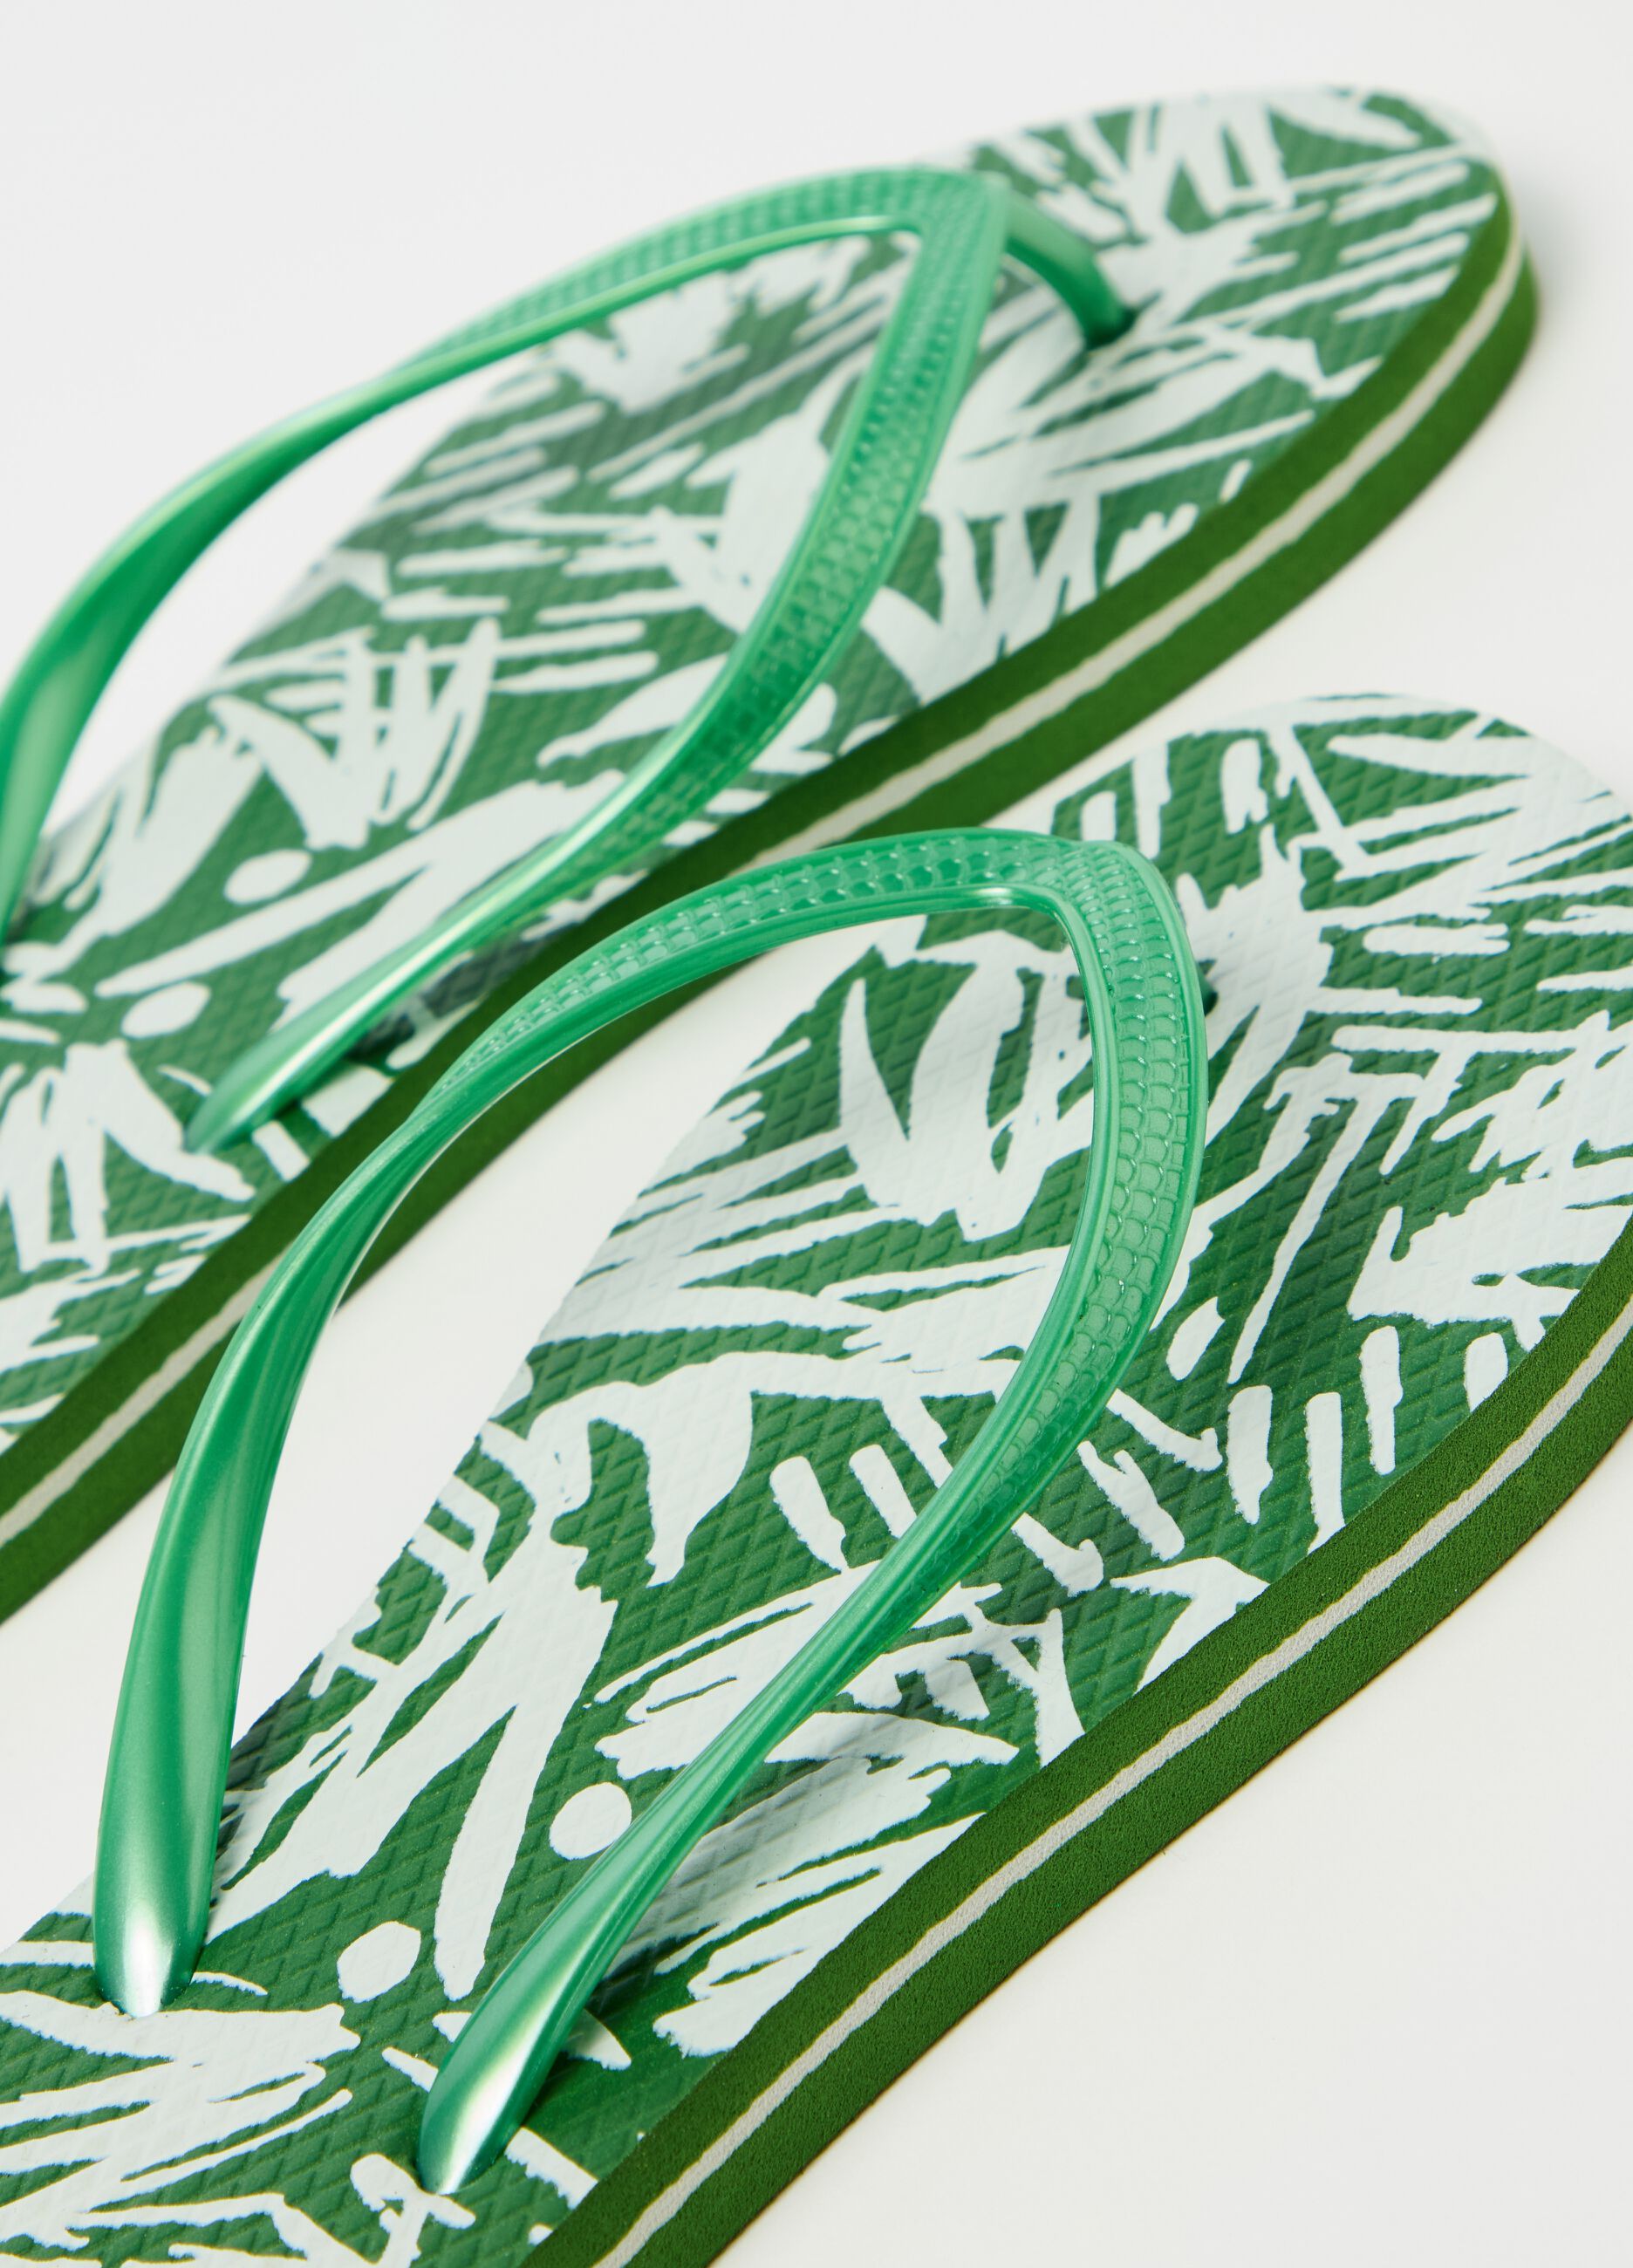 Thong sandals with foliage print